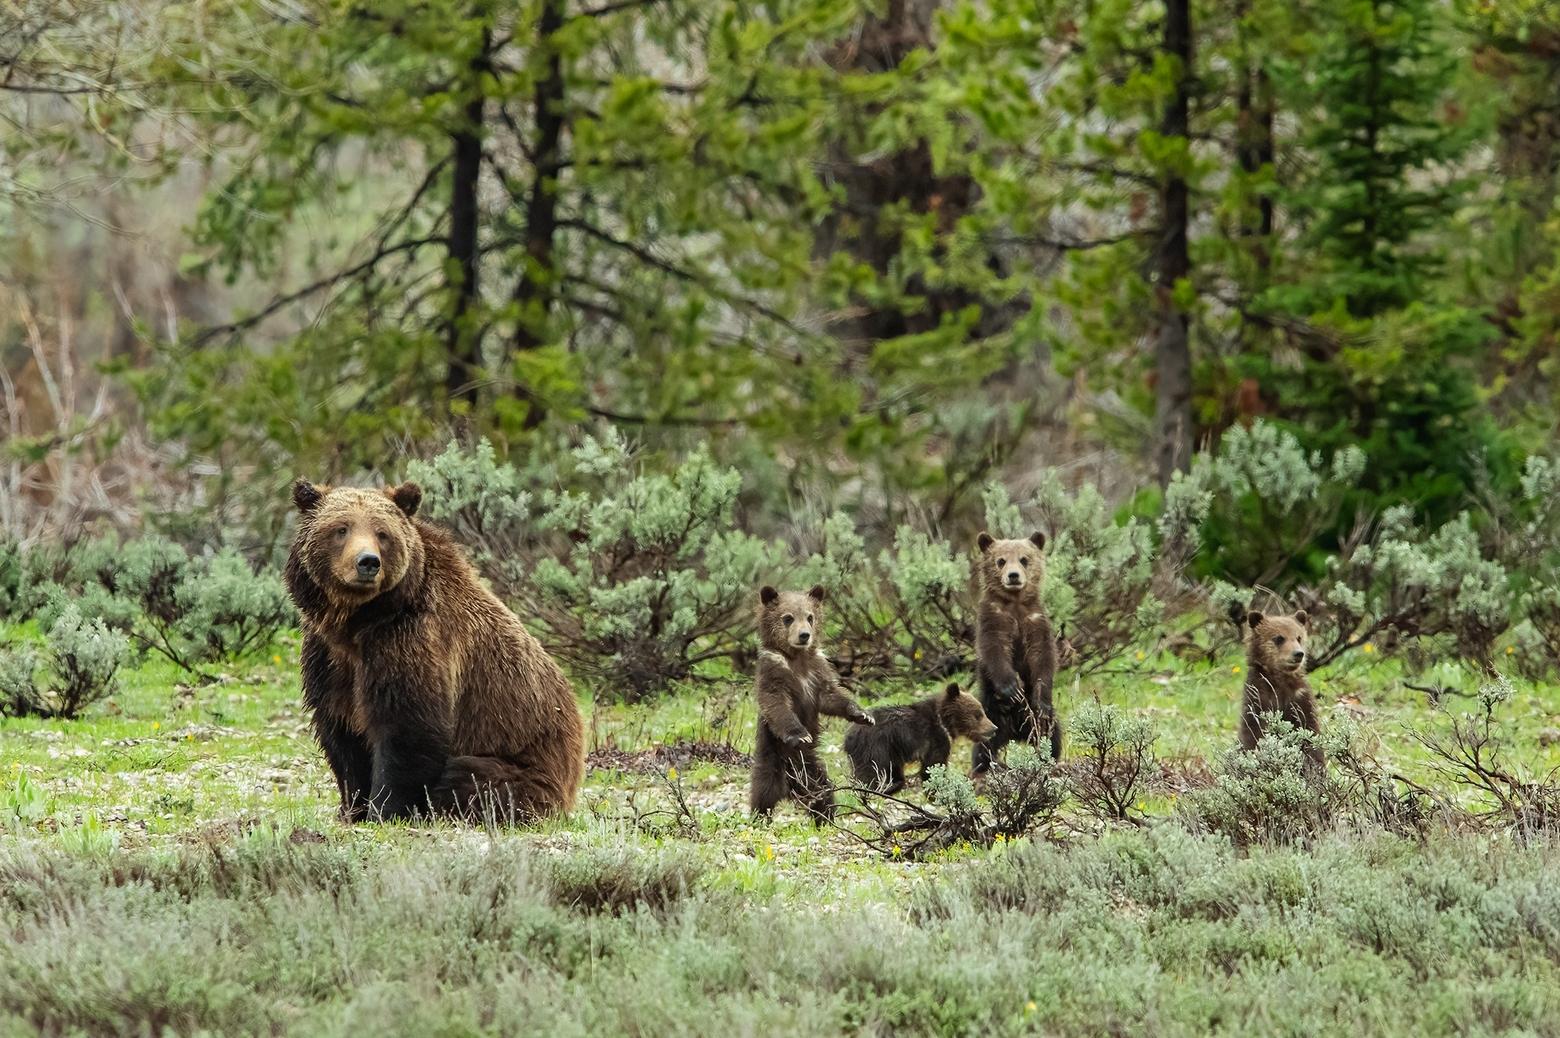 In 2020, 399 astounded her followers around the world when she emerged in spring as fit-looking 24-year-old, with four cubs of the year. Photo by Thomas D. Mangelsen. (mangelsen.com)